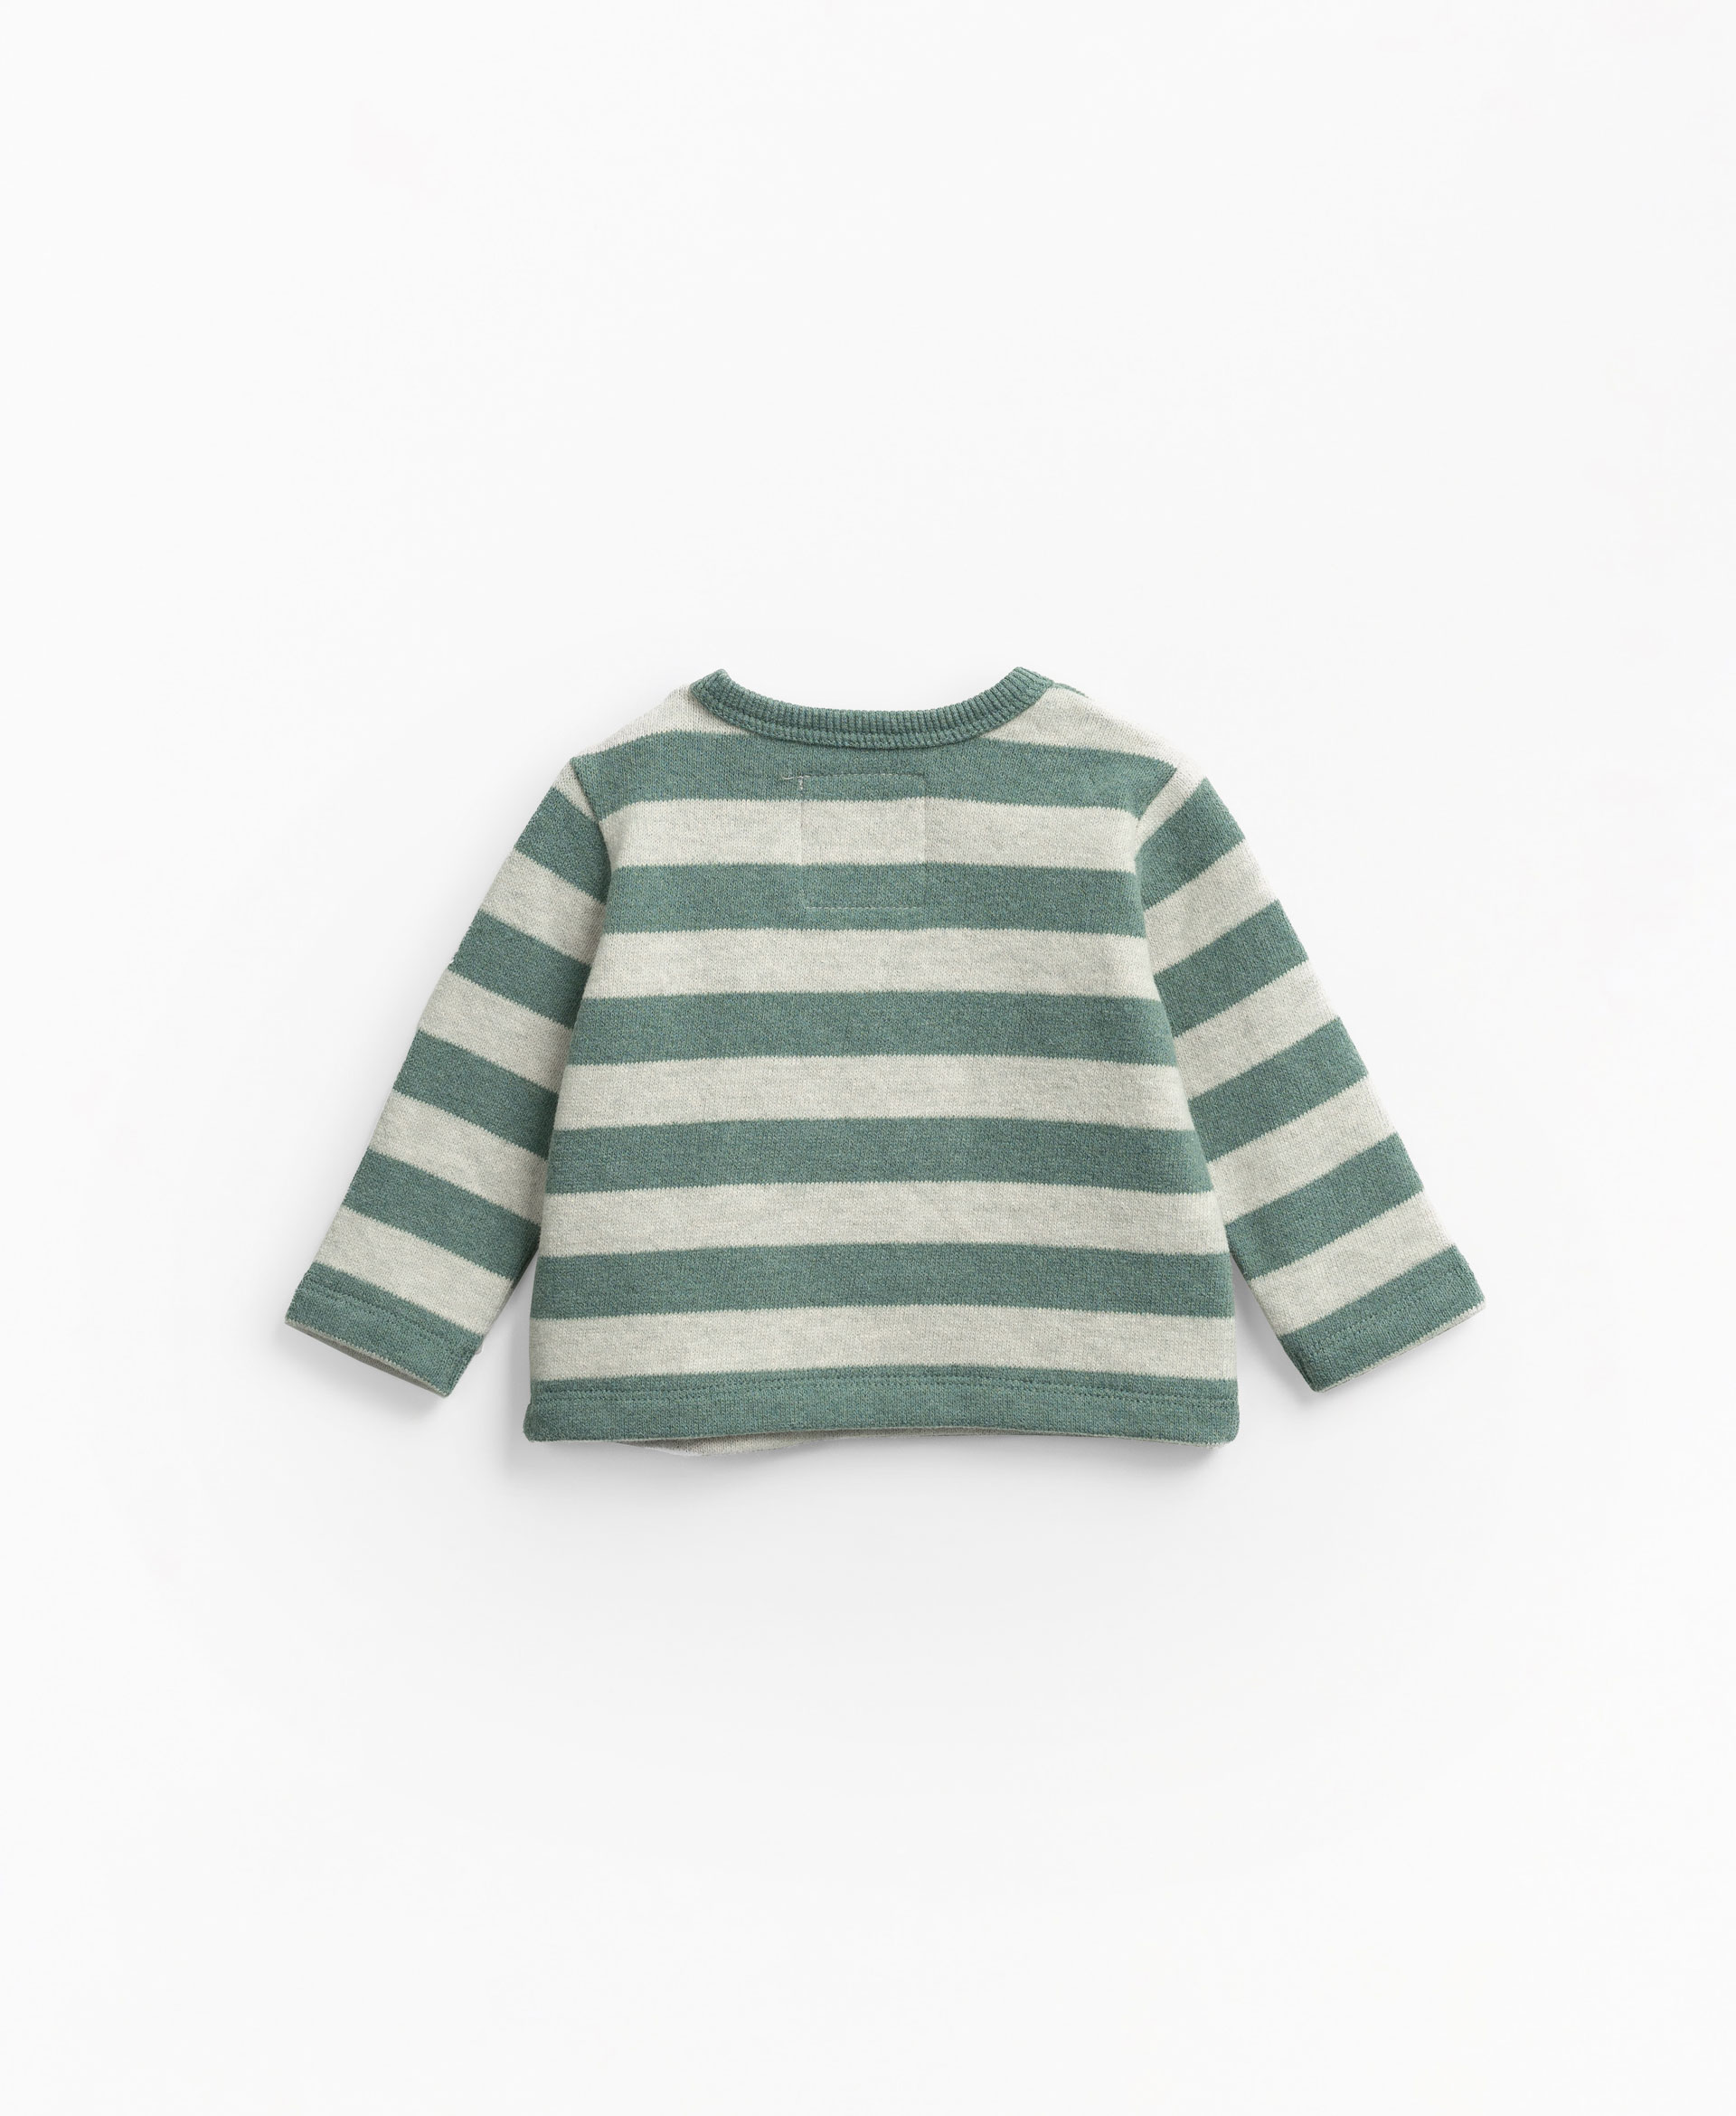 Woven striped jersey | Mother Lcia